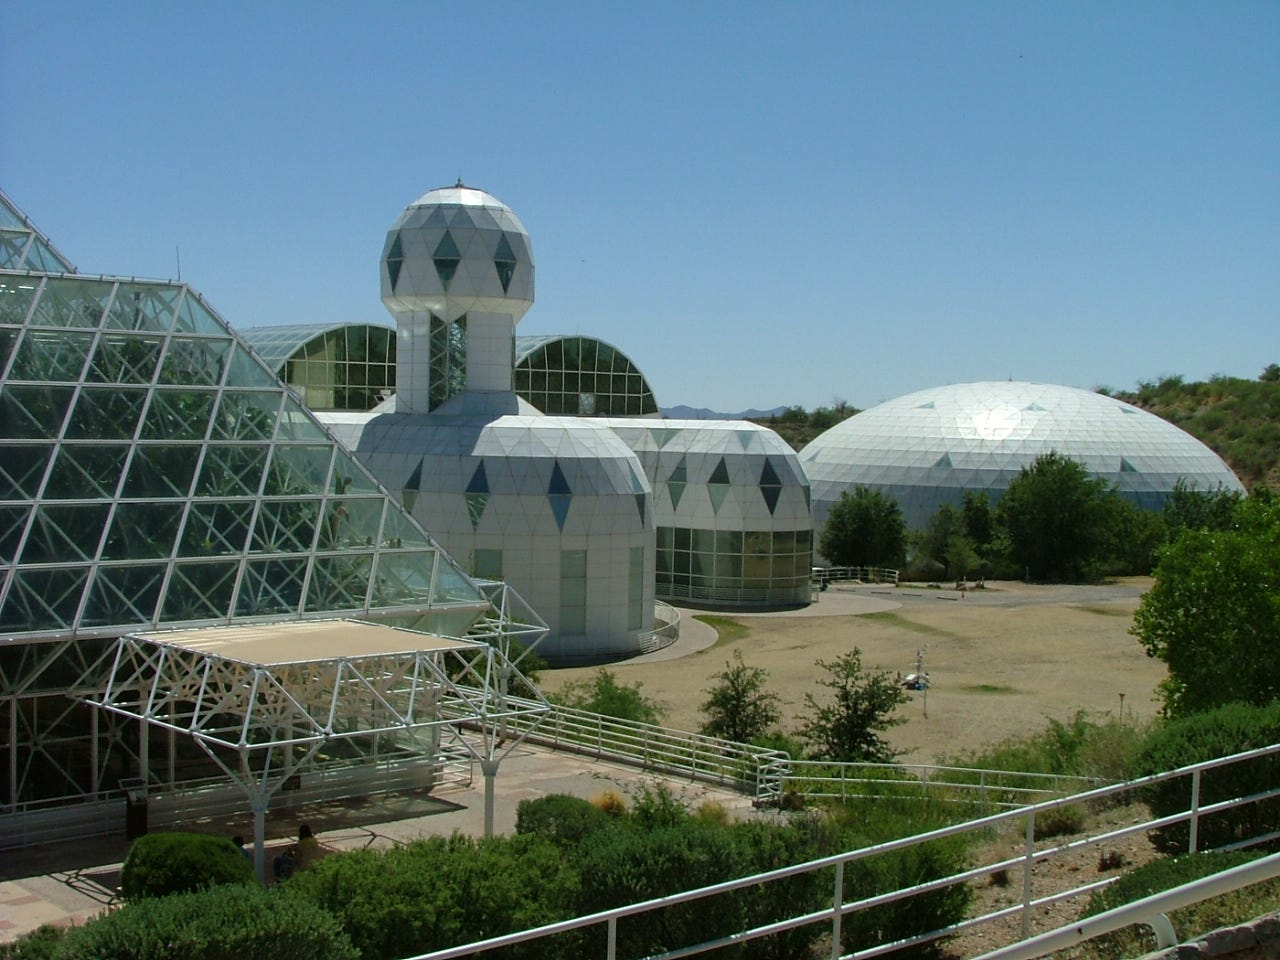 The Story of Another Biosphere(version 3)